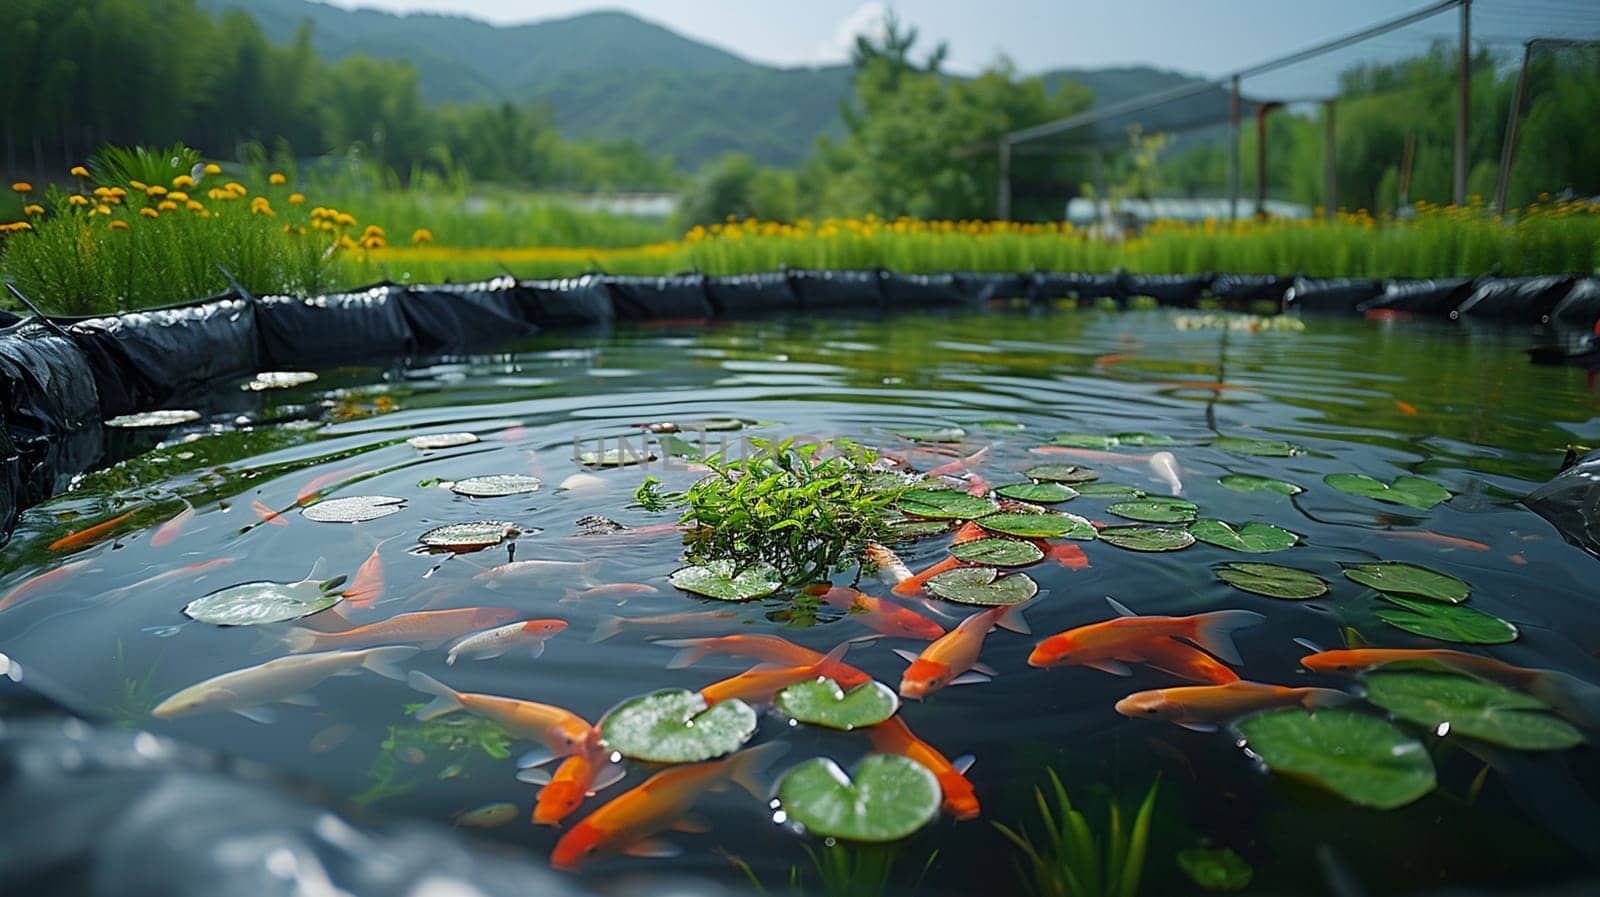 Colorful koi fish glide under water amidst floating lily pads with sunlit flowers in background